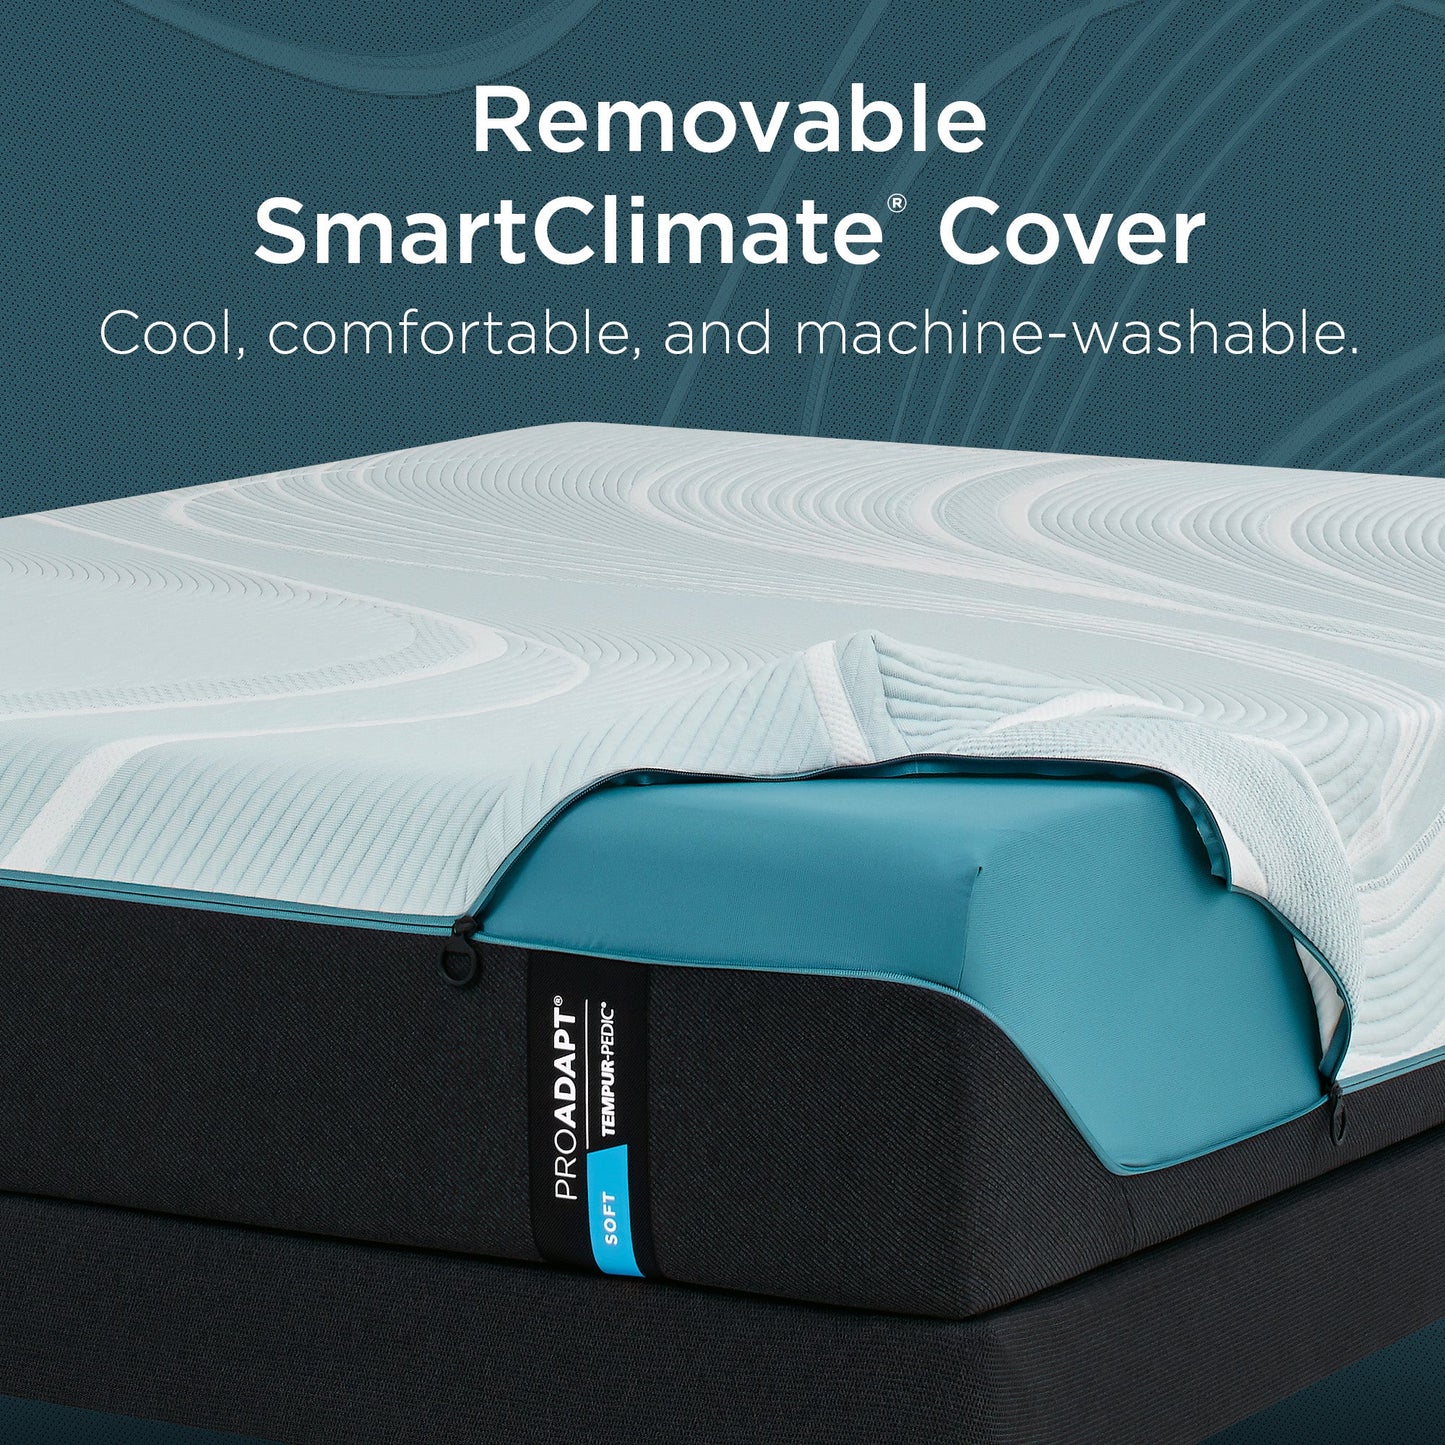 Removable SmartClimate Cover